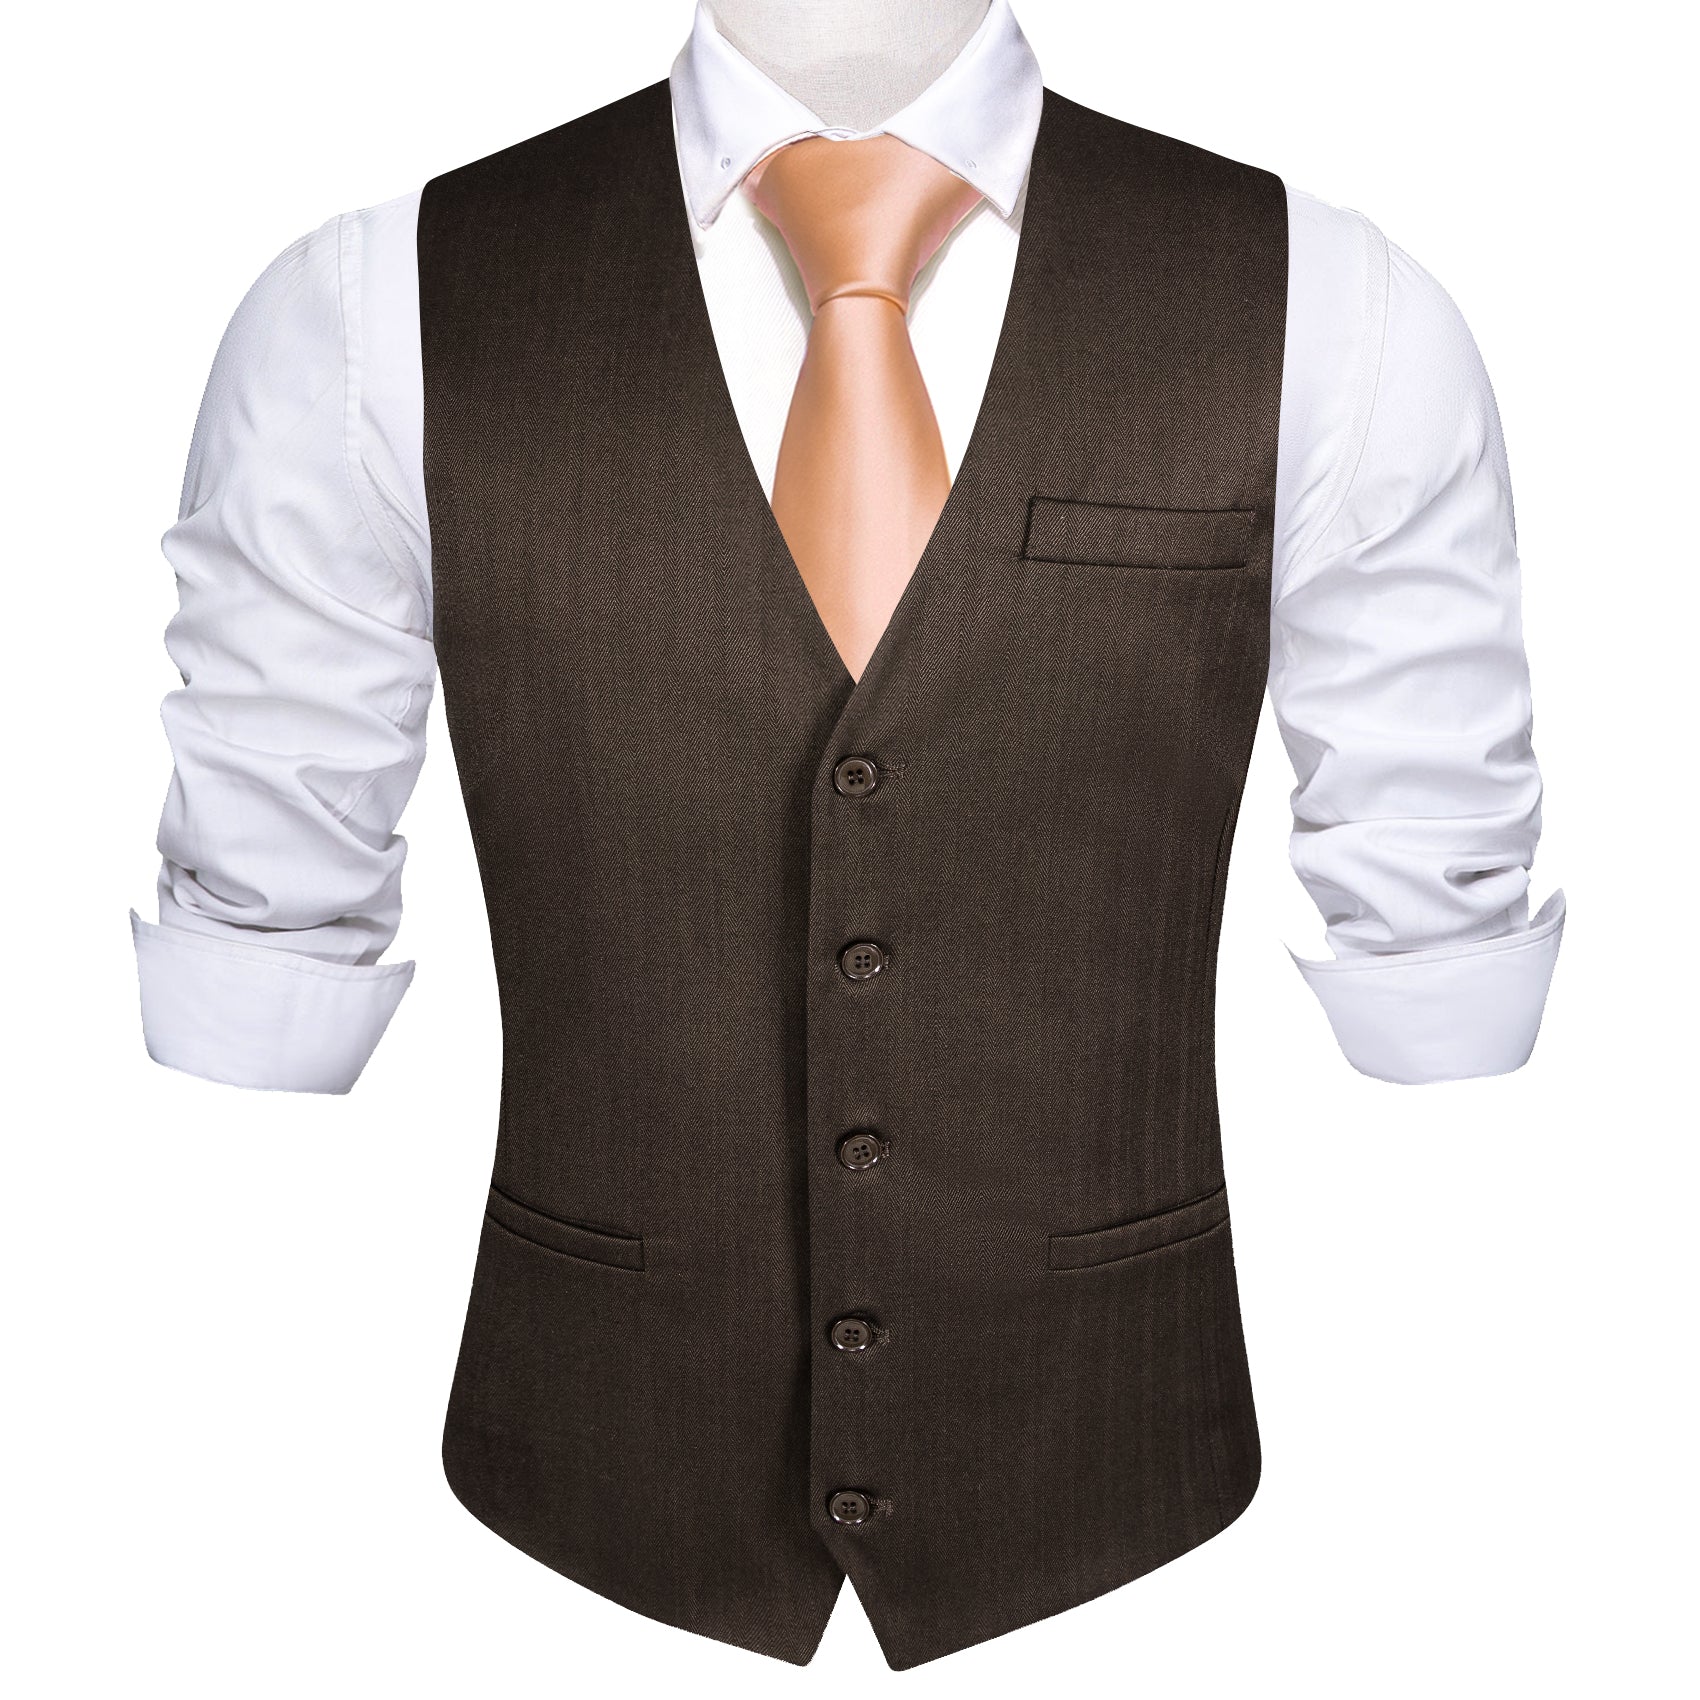 Barry.wang Luxury Bark Solid Vest Waistcoat For Business